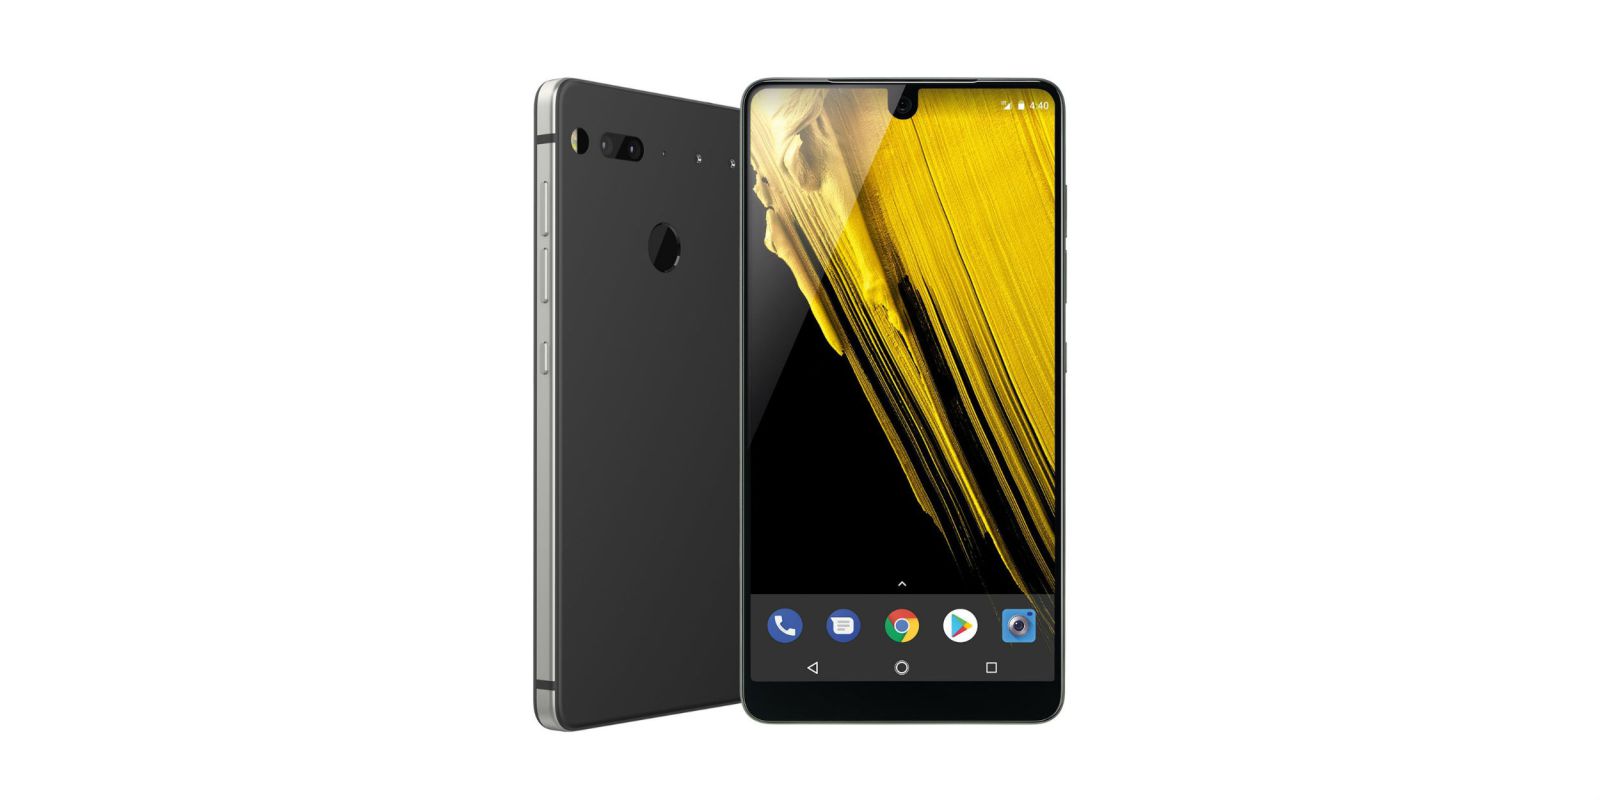 In Essential released another version of the smartphone - Halo Gray with Amazon Alexa